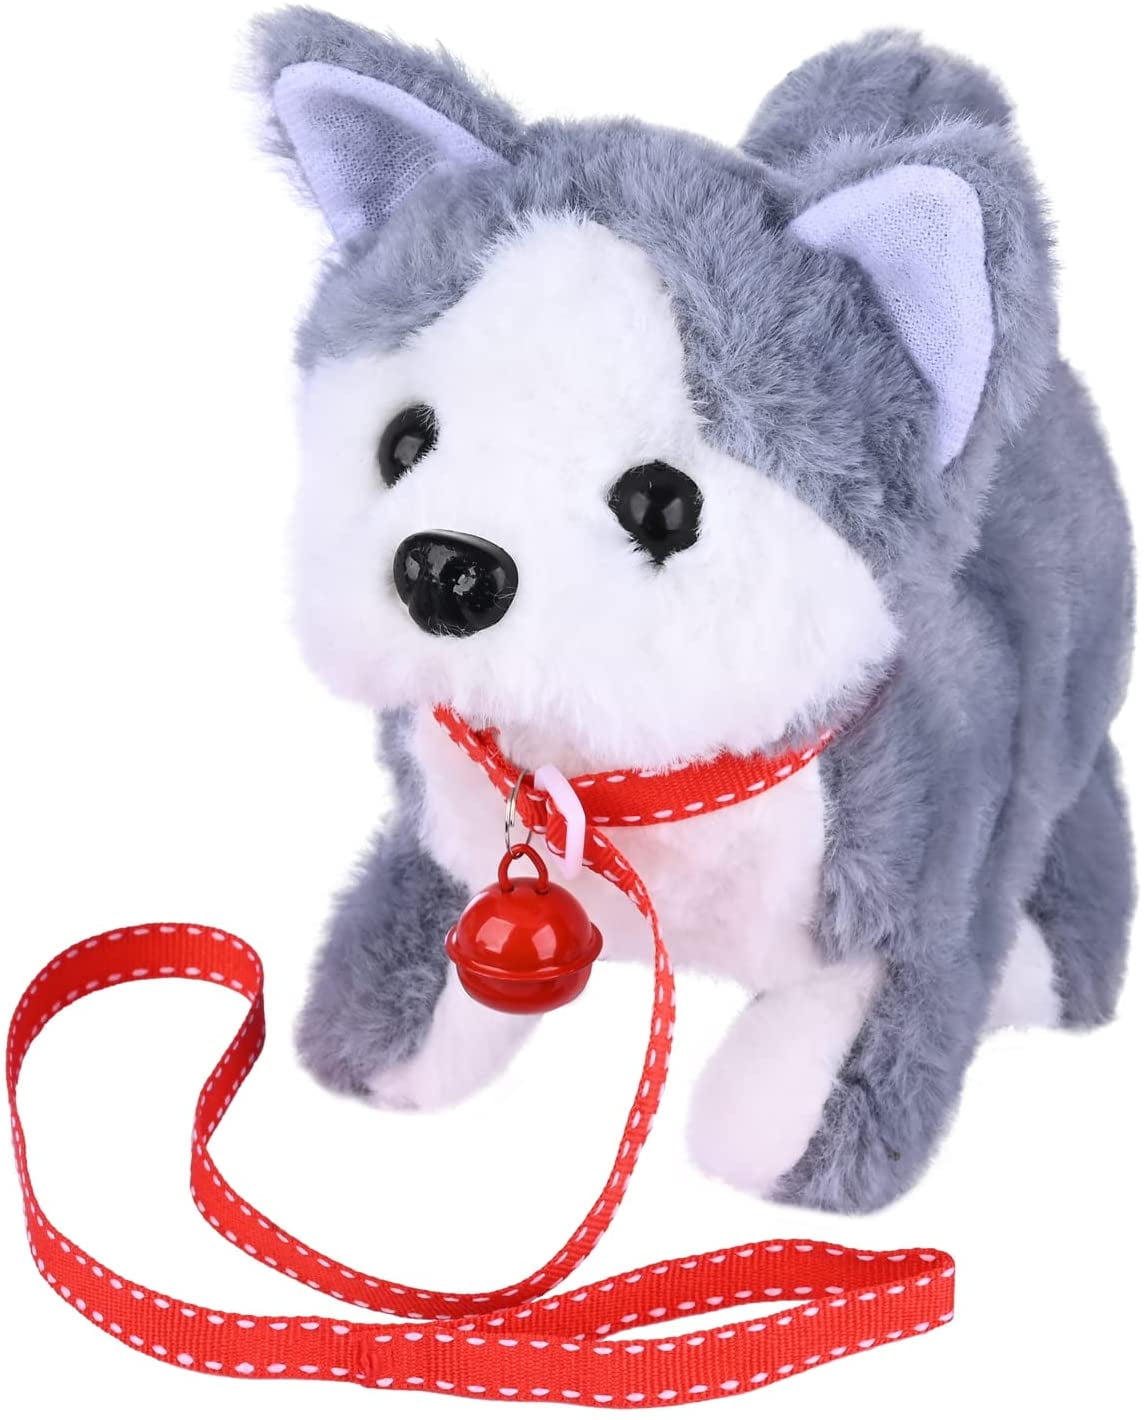 Tail Wagging Liberty Imports Plush Husky Toy Puppy Electronic Interactive Pet Dog Stretching Companion Animal for Kids Walking Barking 